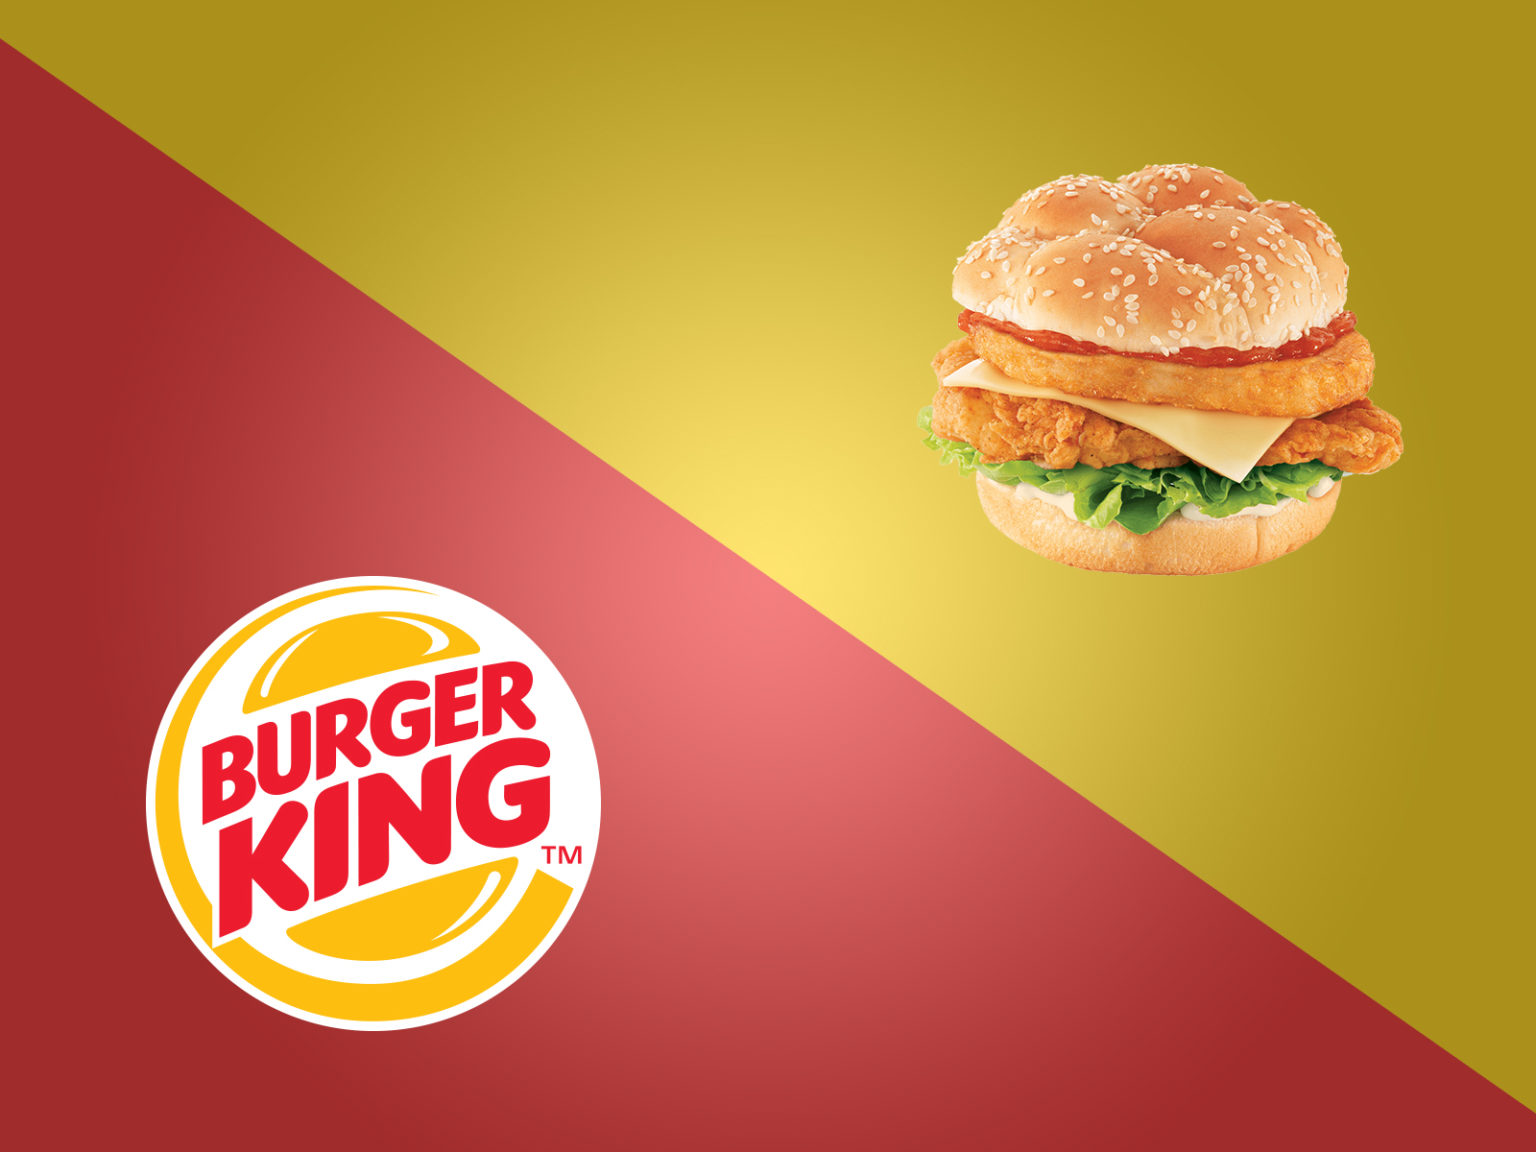 Burger King Brand Backgrounds Foods Drinks Templates Free PPT Grounds